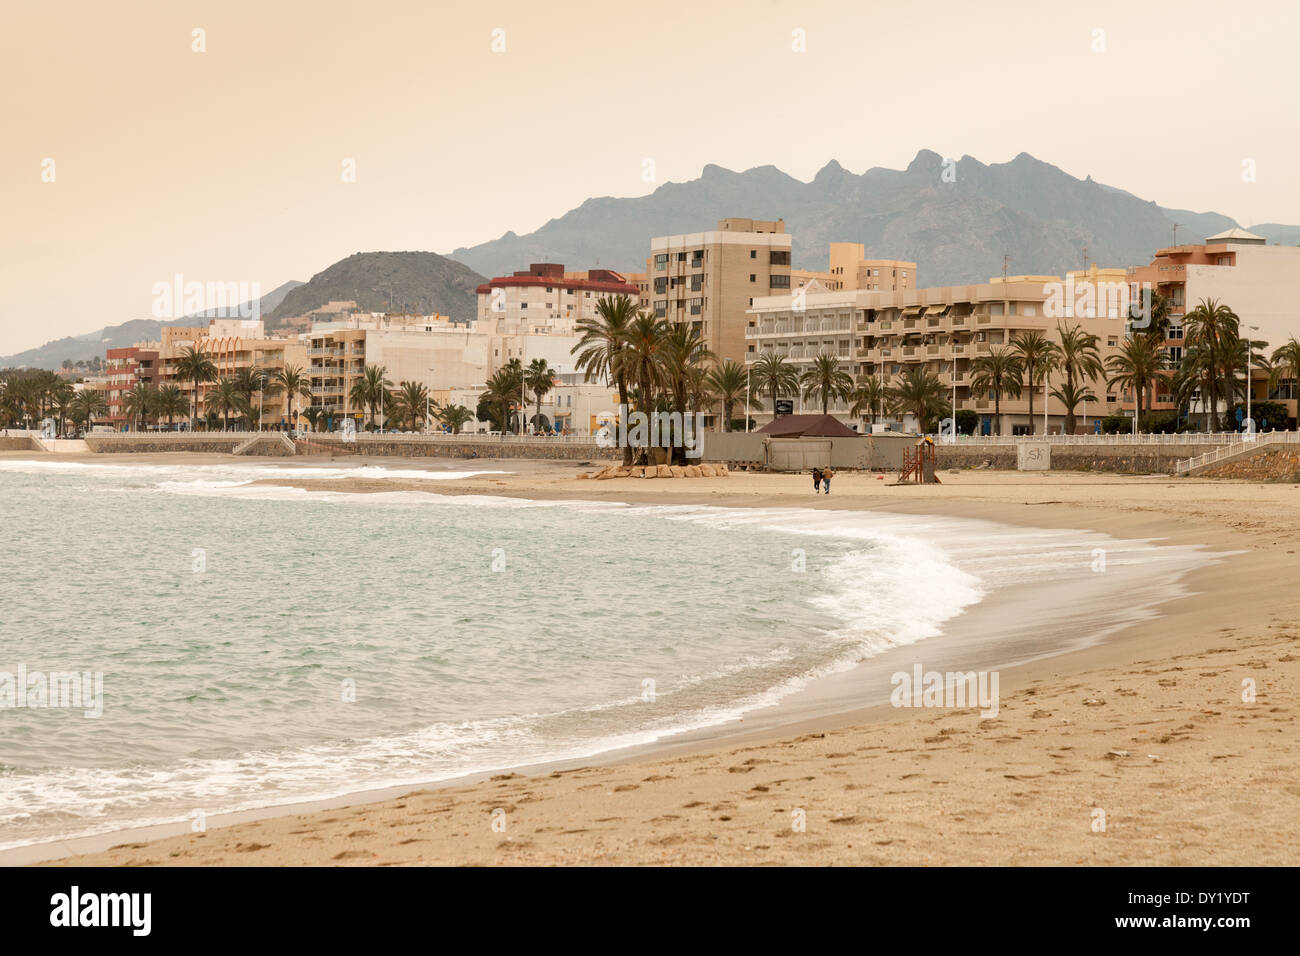 People walking on the beach in the distance in the evening, Garrucha, Almeria Andalusia Spain Europe Stock Photo